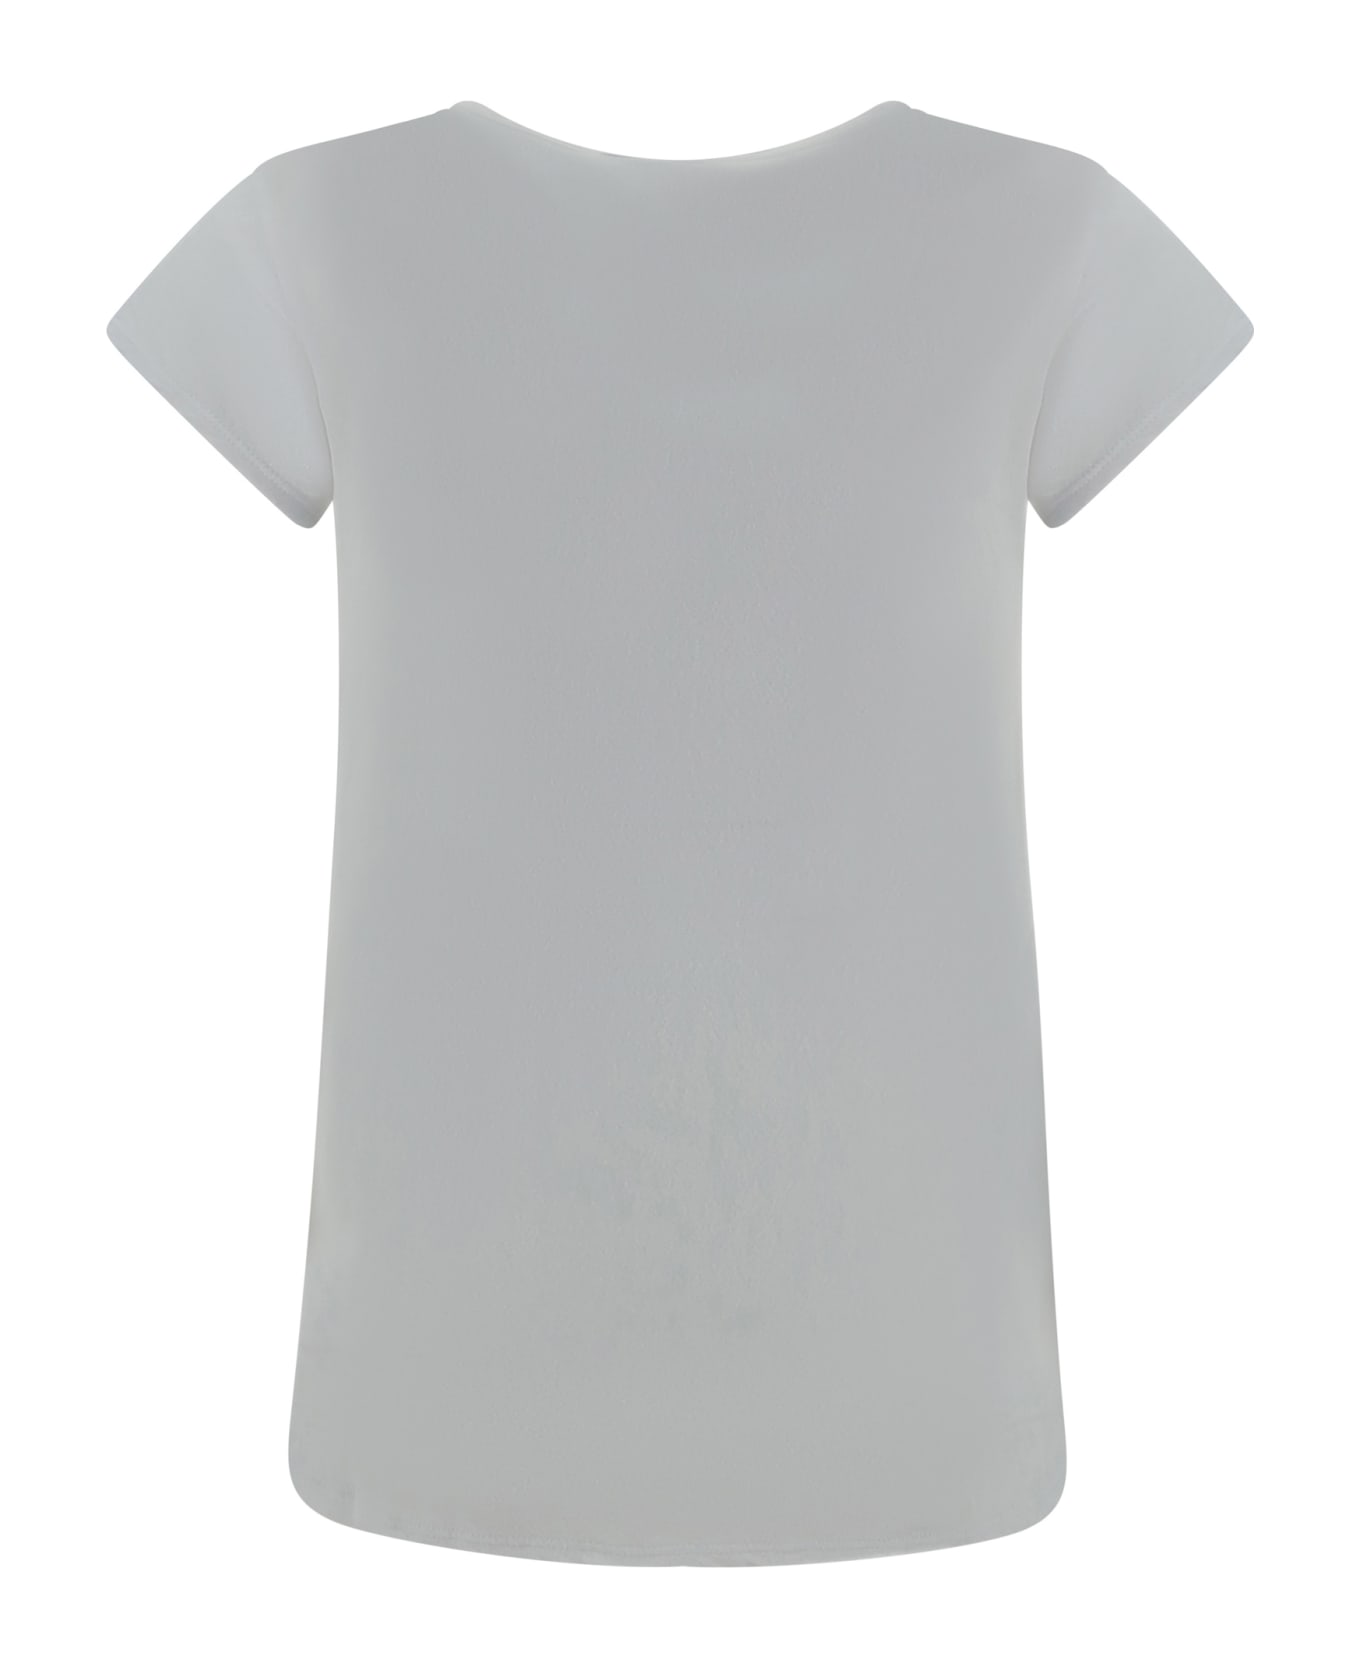 James Perse T-shirt - White